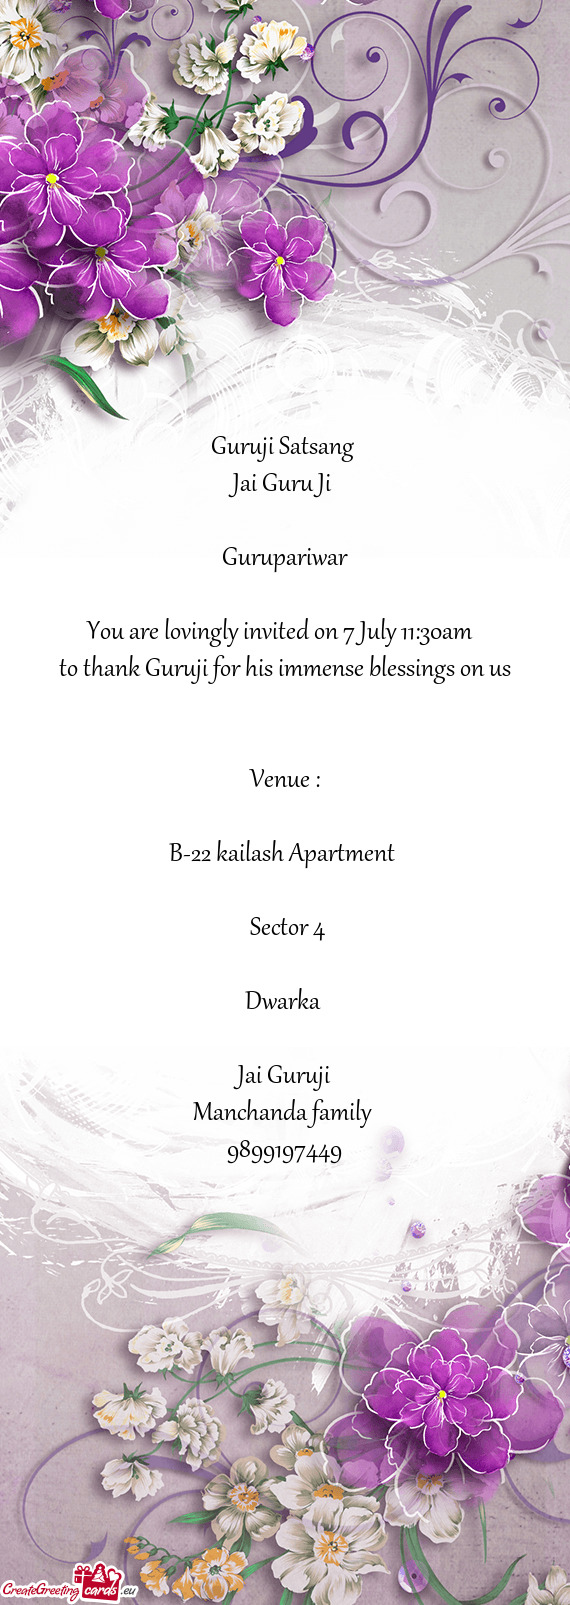 You are lovingly invited on 7 July 11:30am